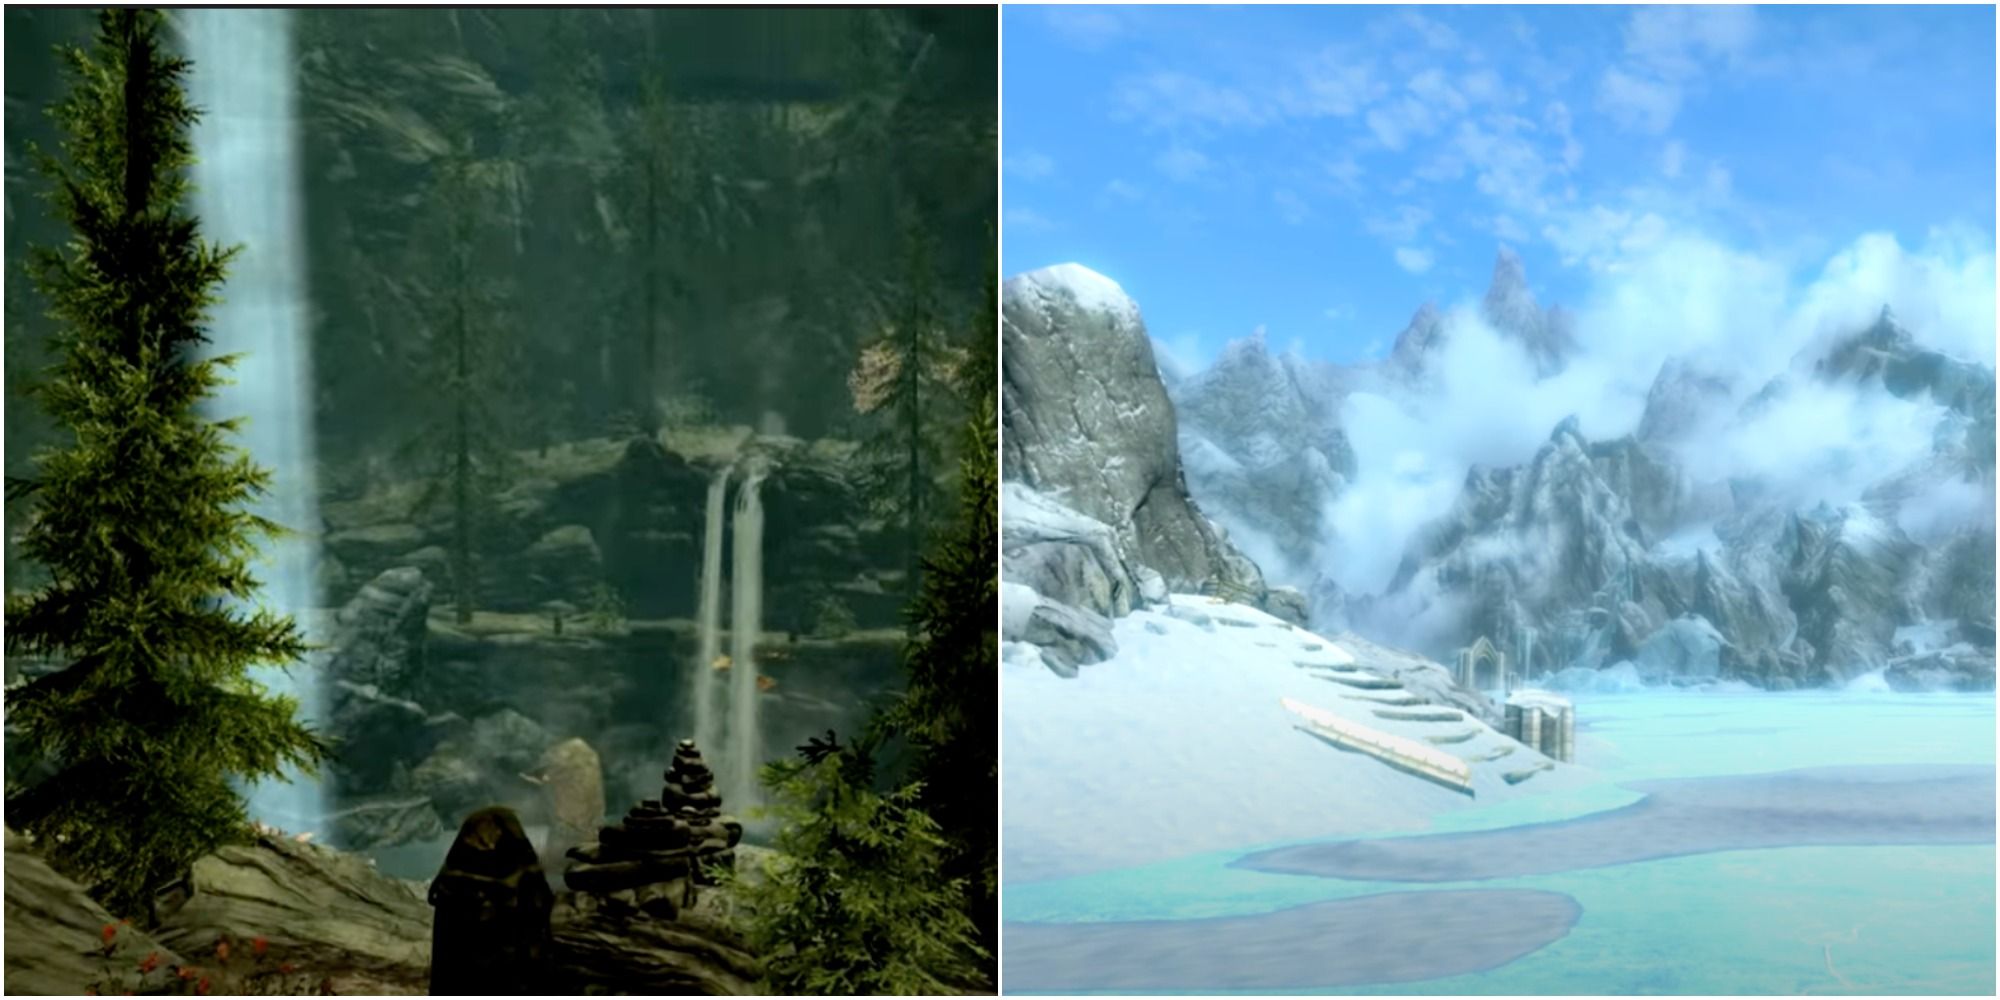 Elder Scrolls V: Skyrim A much more peaceful exploration of beautiful locations